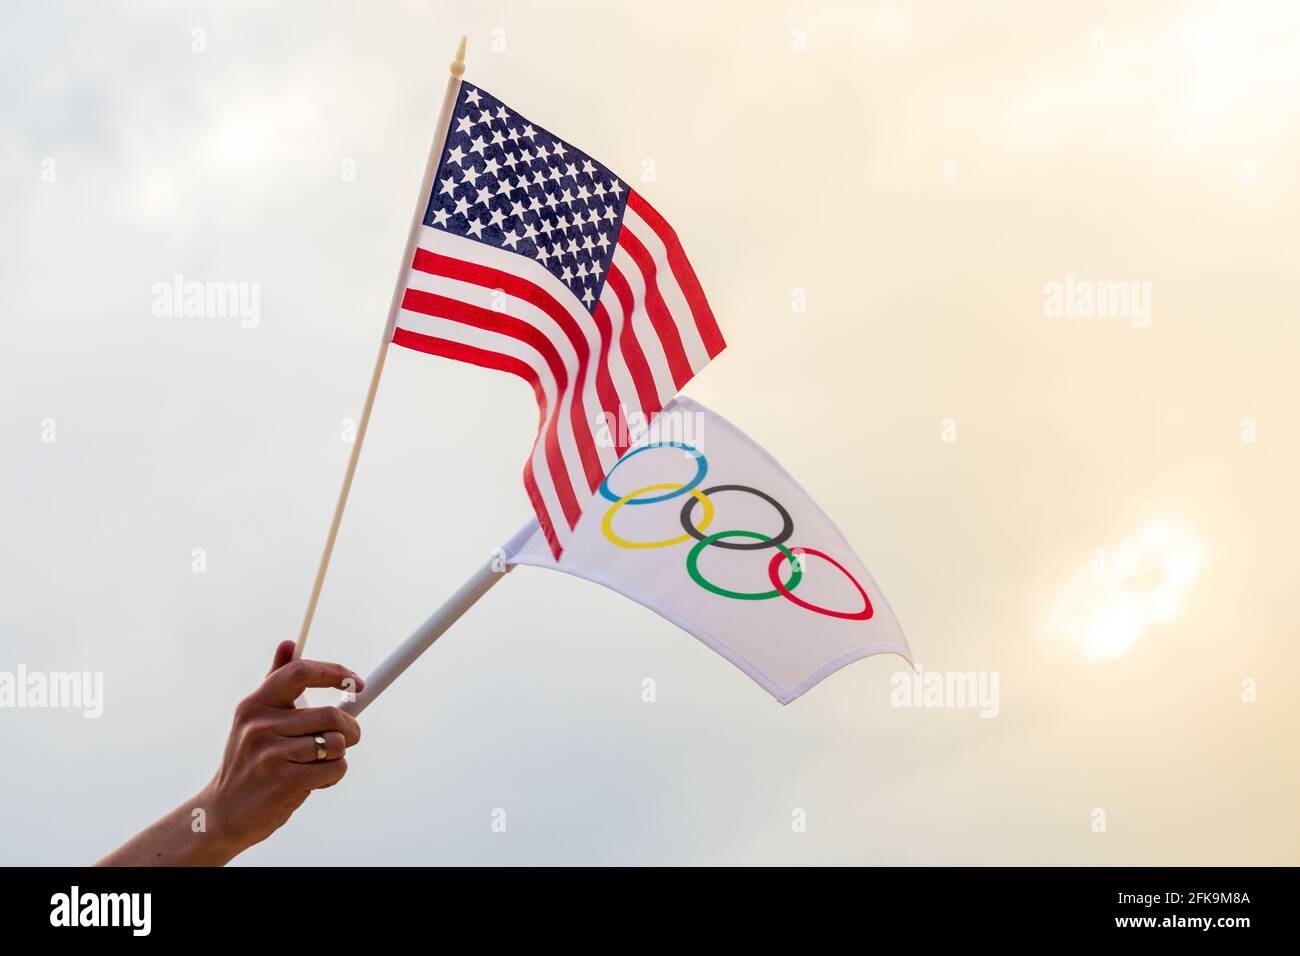 Fan waving the national flag of  USA and the Olympic flag with symbol olympics rings. Stock Photo